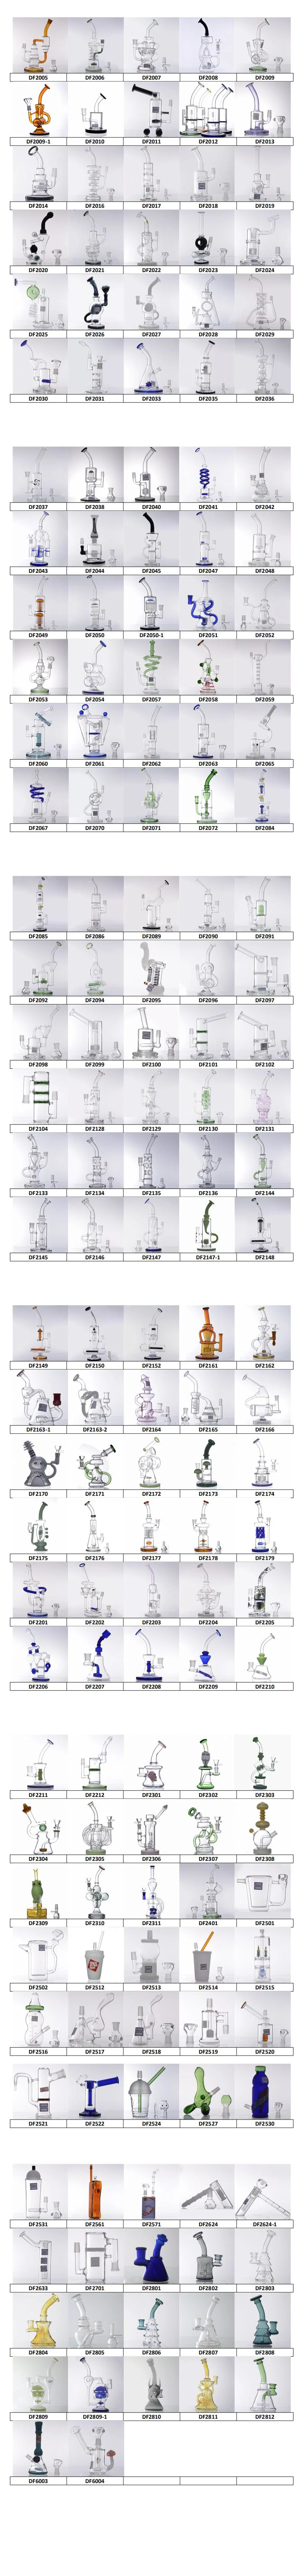 DF2144 Green+Clear Glass Smoking Hookah Pipe Glass Water Pipe